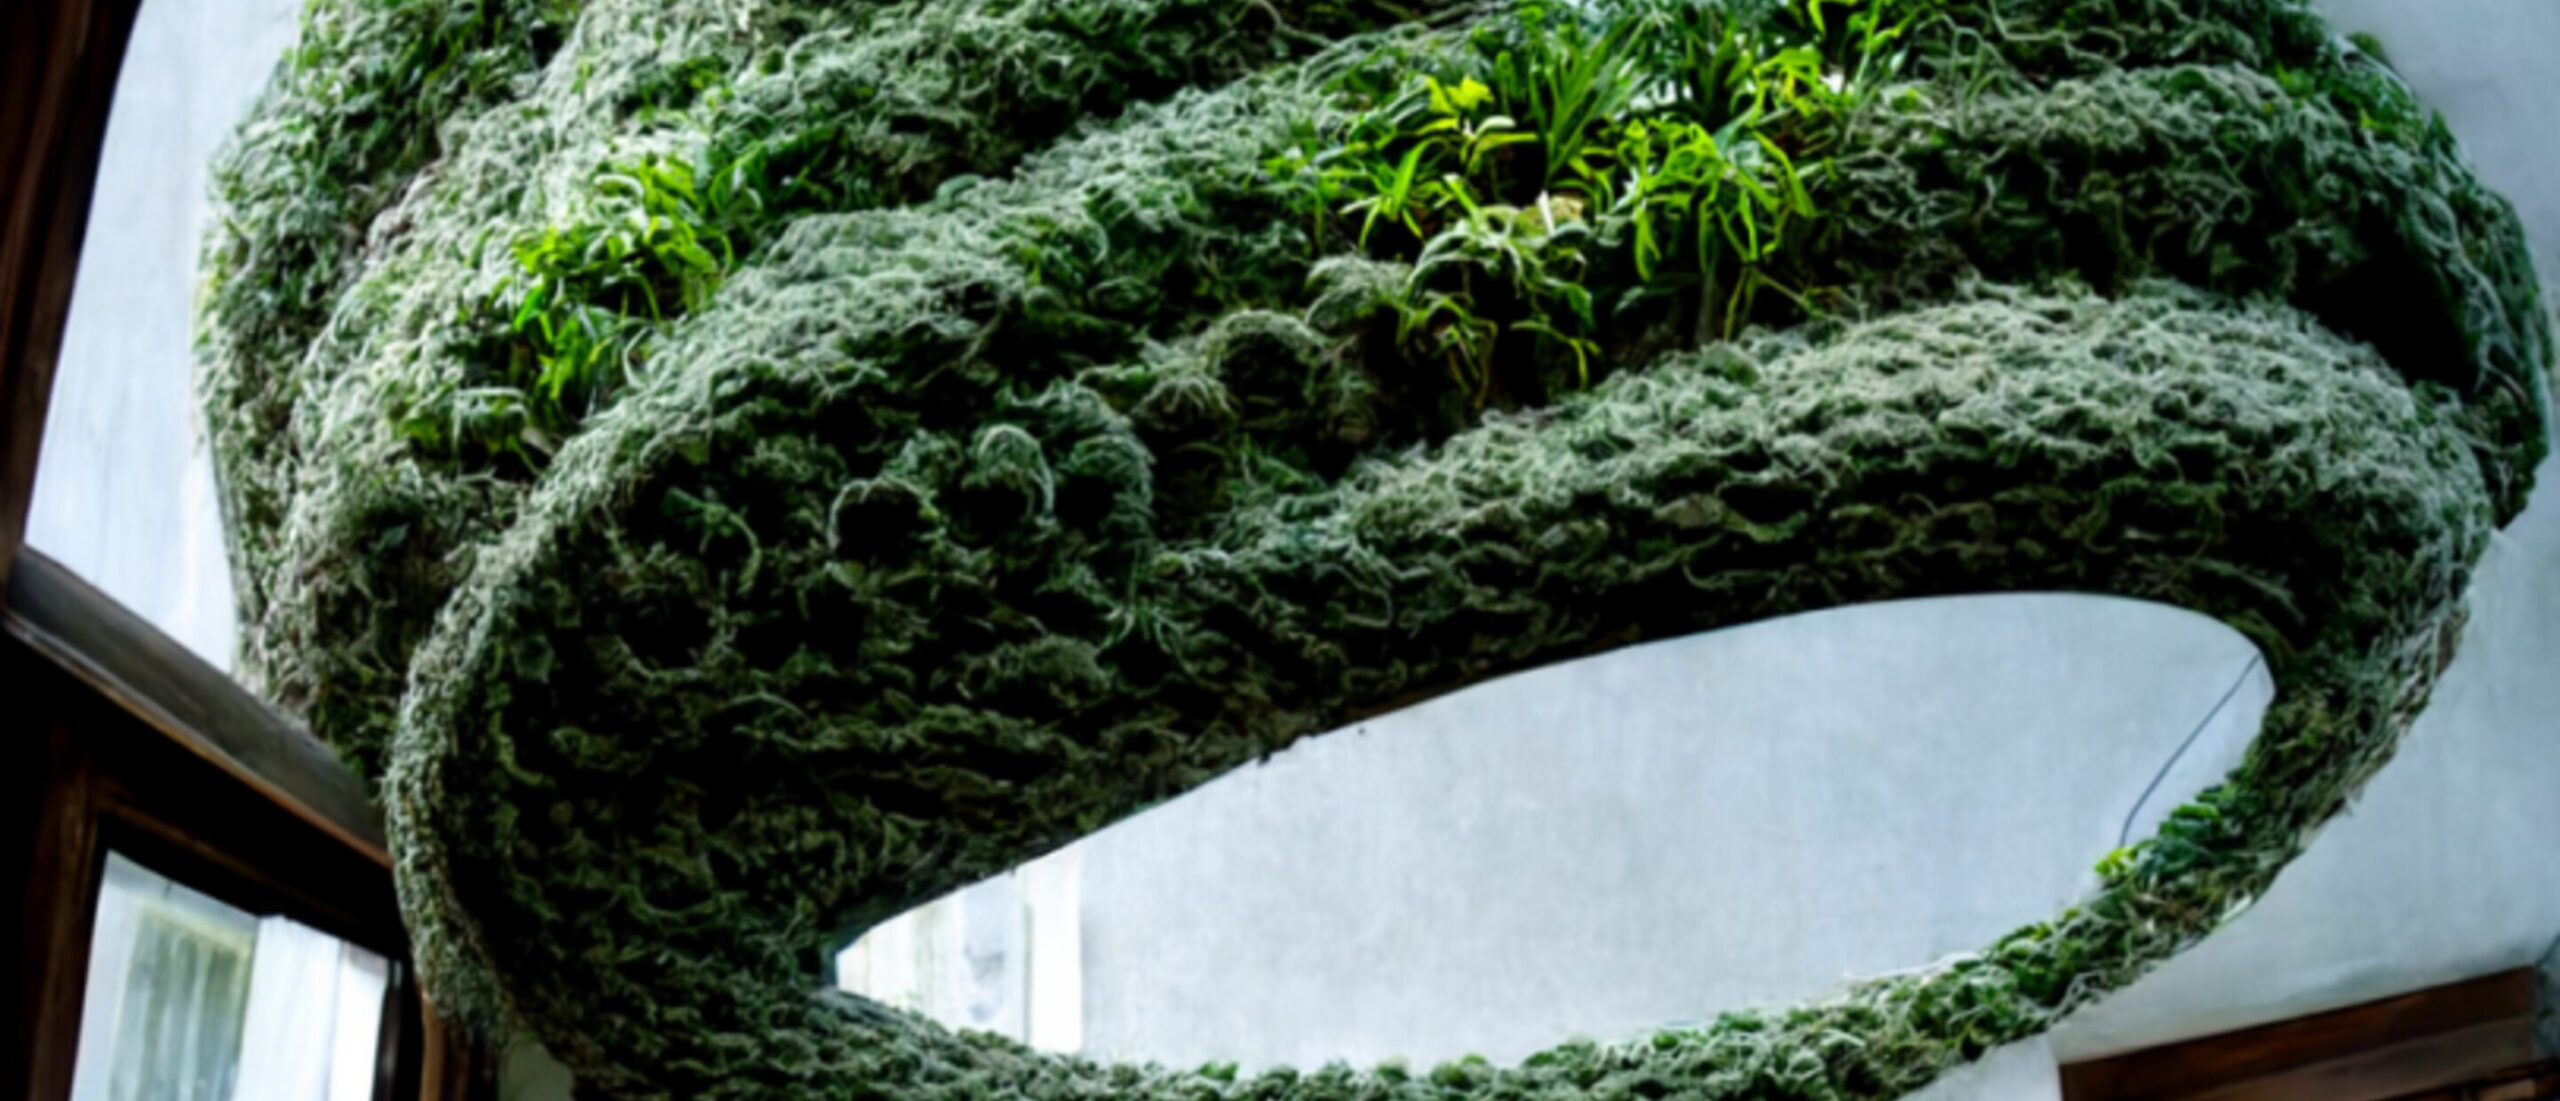 Fibre sculptures with plants growing from them